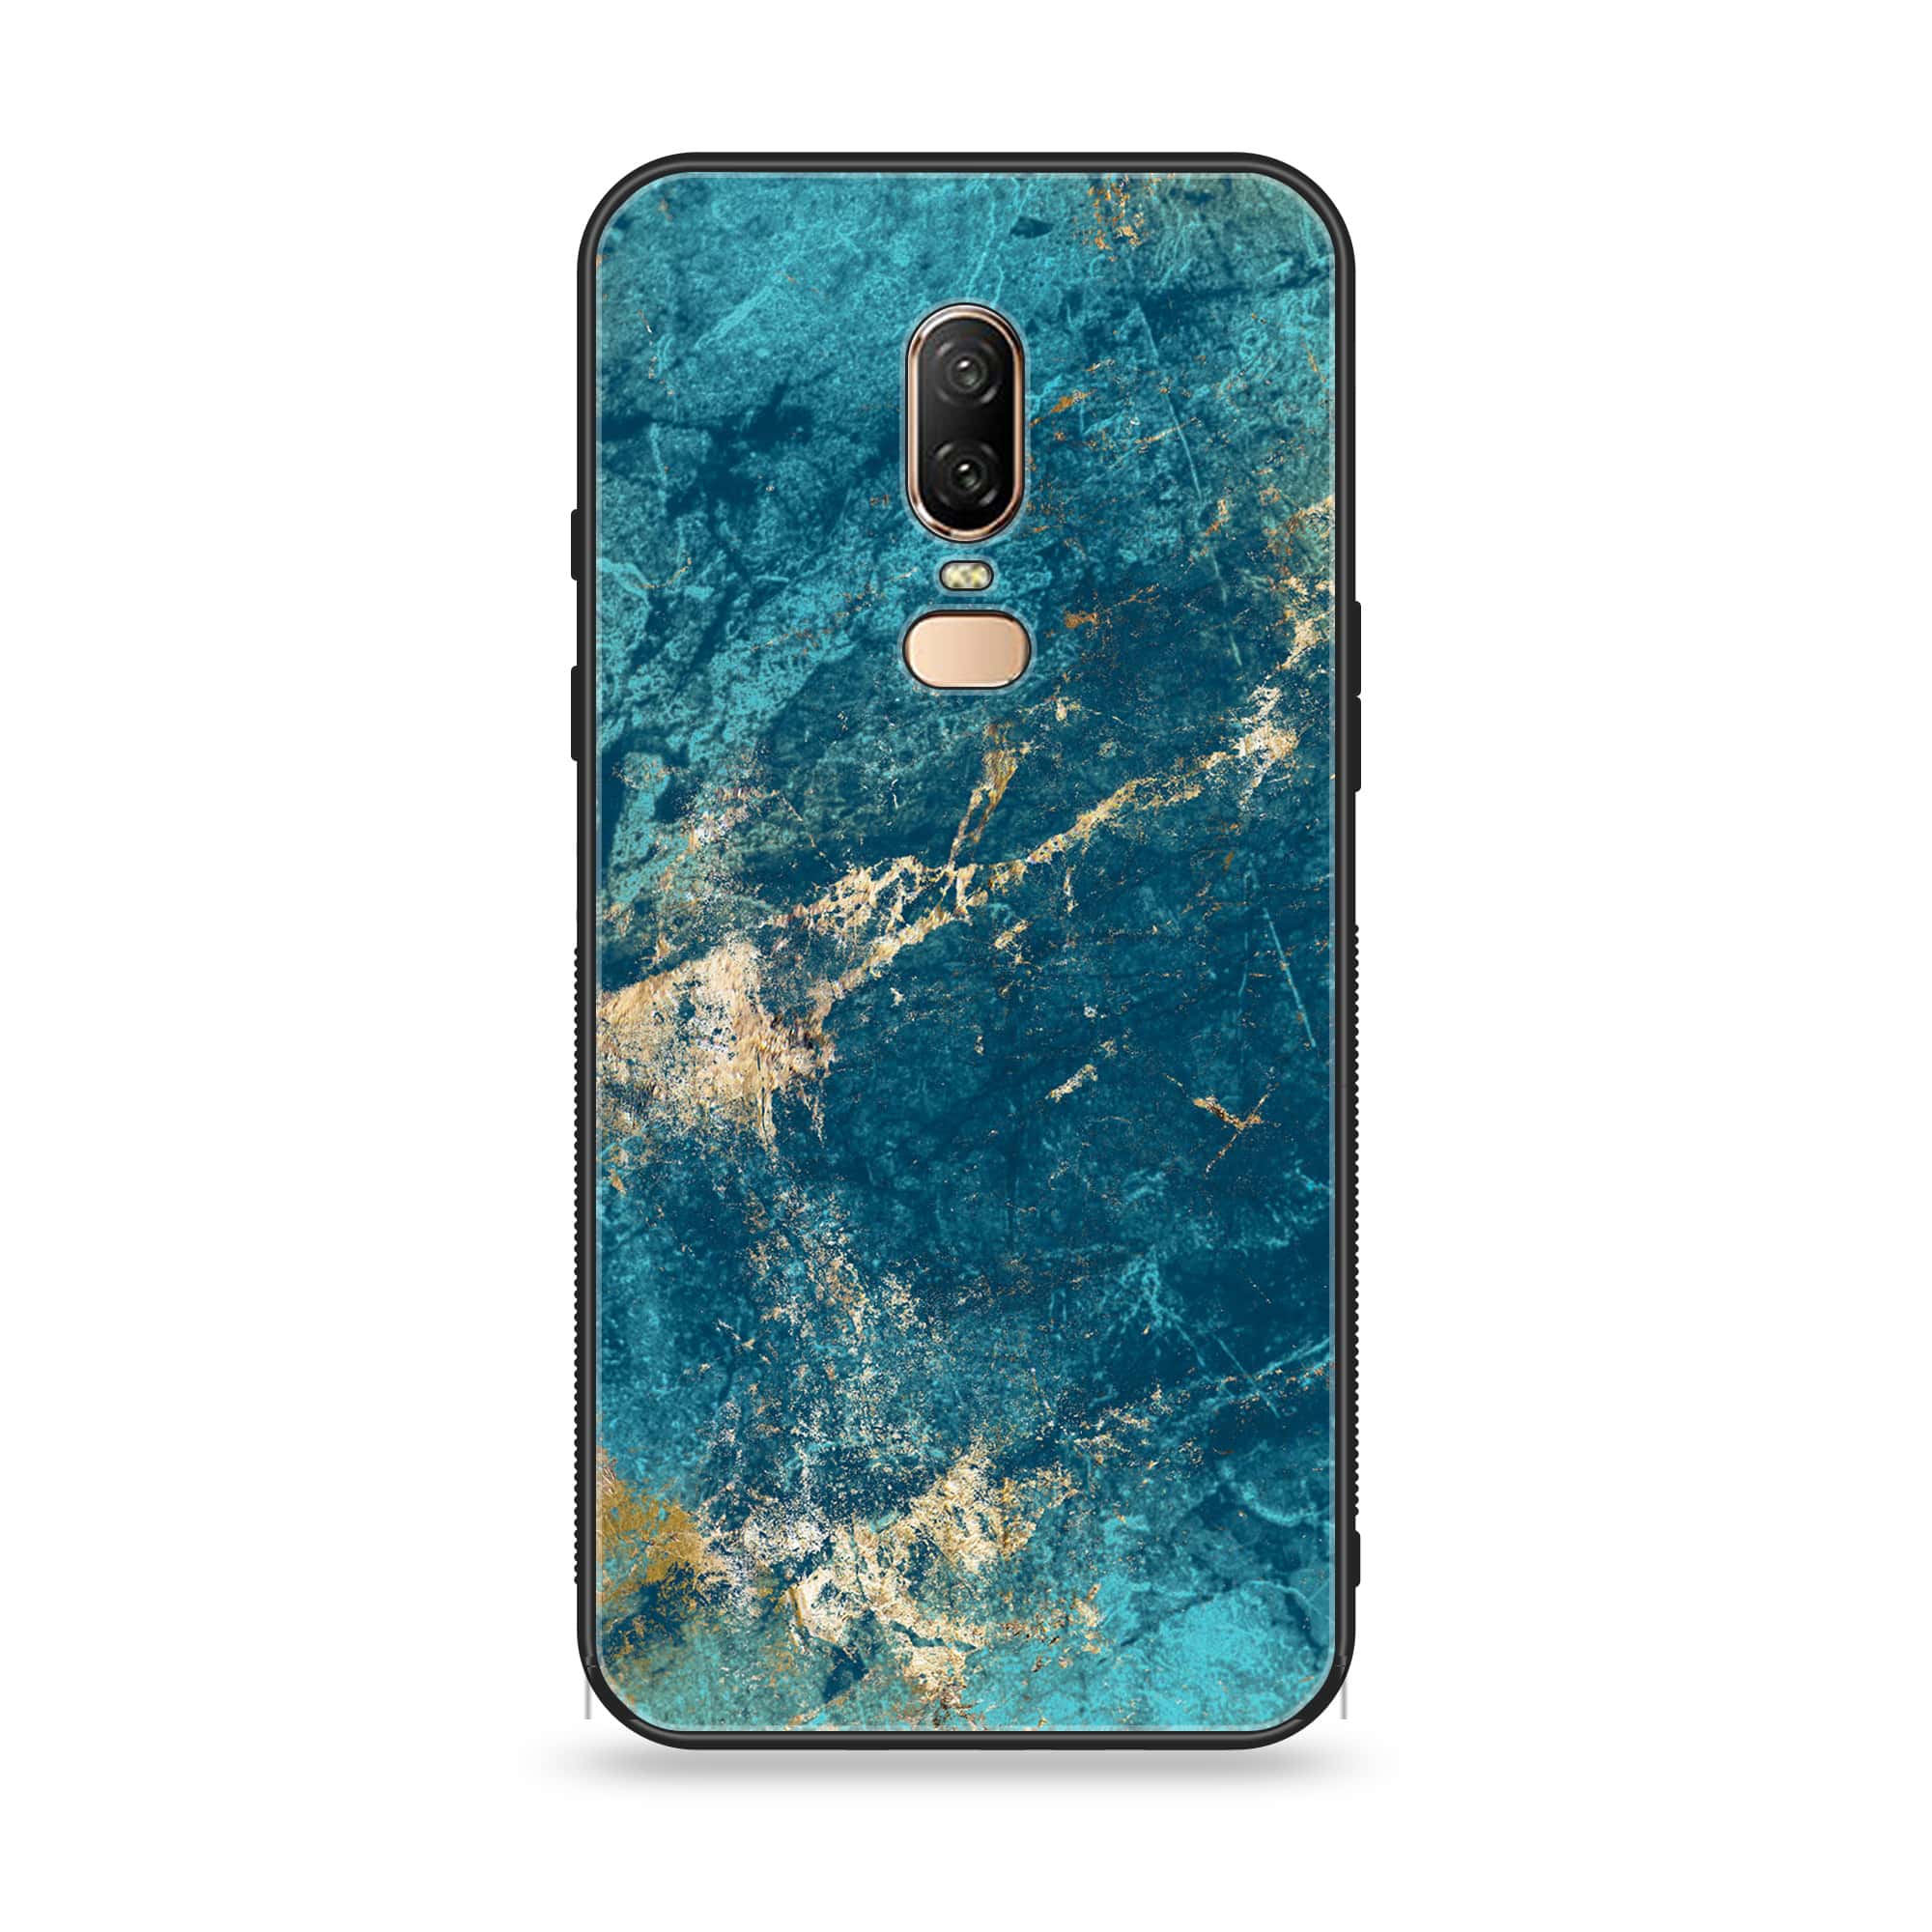 OnePlus 6 - Blue Marble Series V 2.0 - Premium Printed Glass soft Bumper shock Proof Case